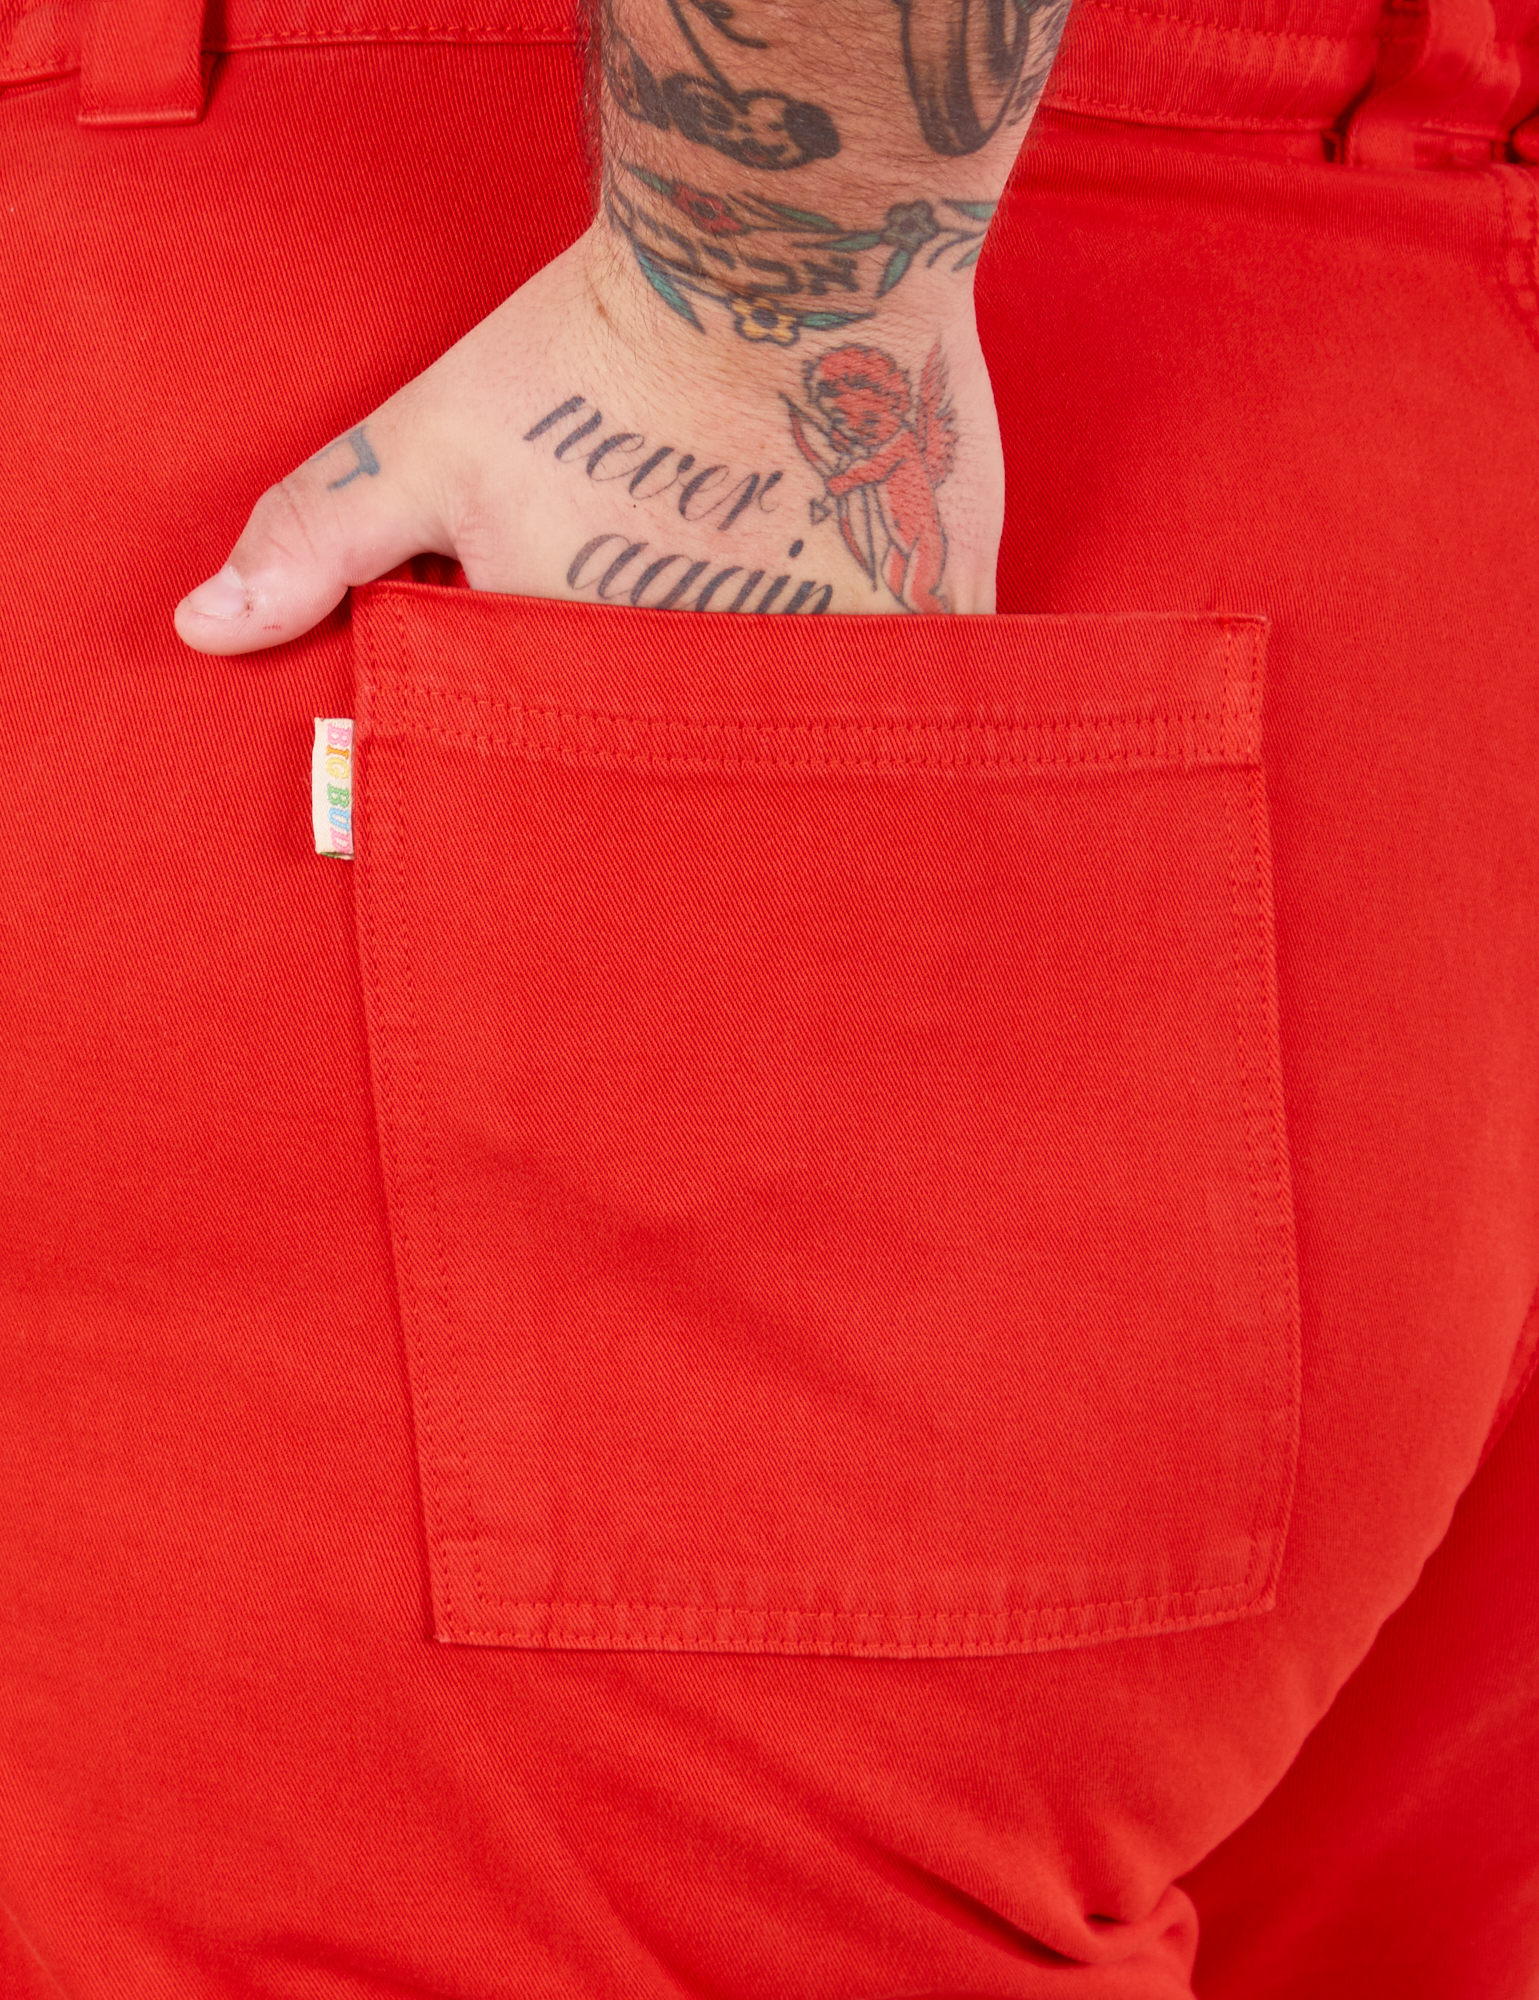 Bell Bottoms in Mustang Red back pocket close up. Sam has their hand in the pocket.